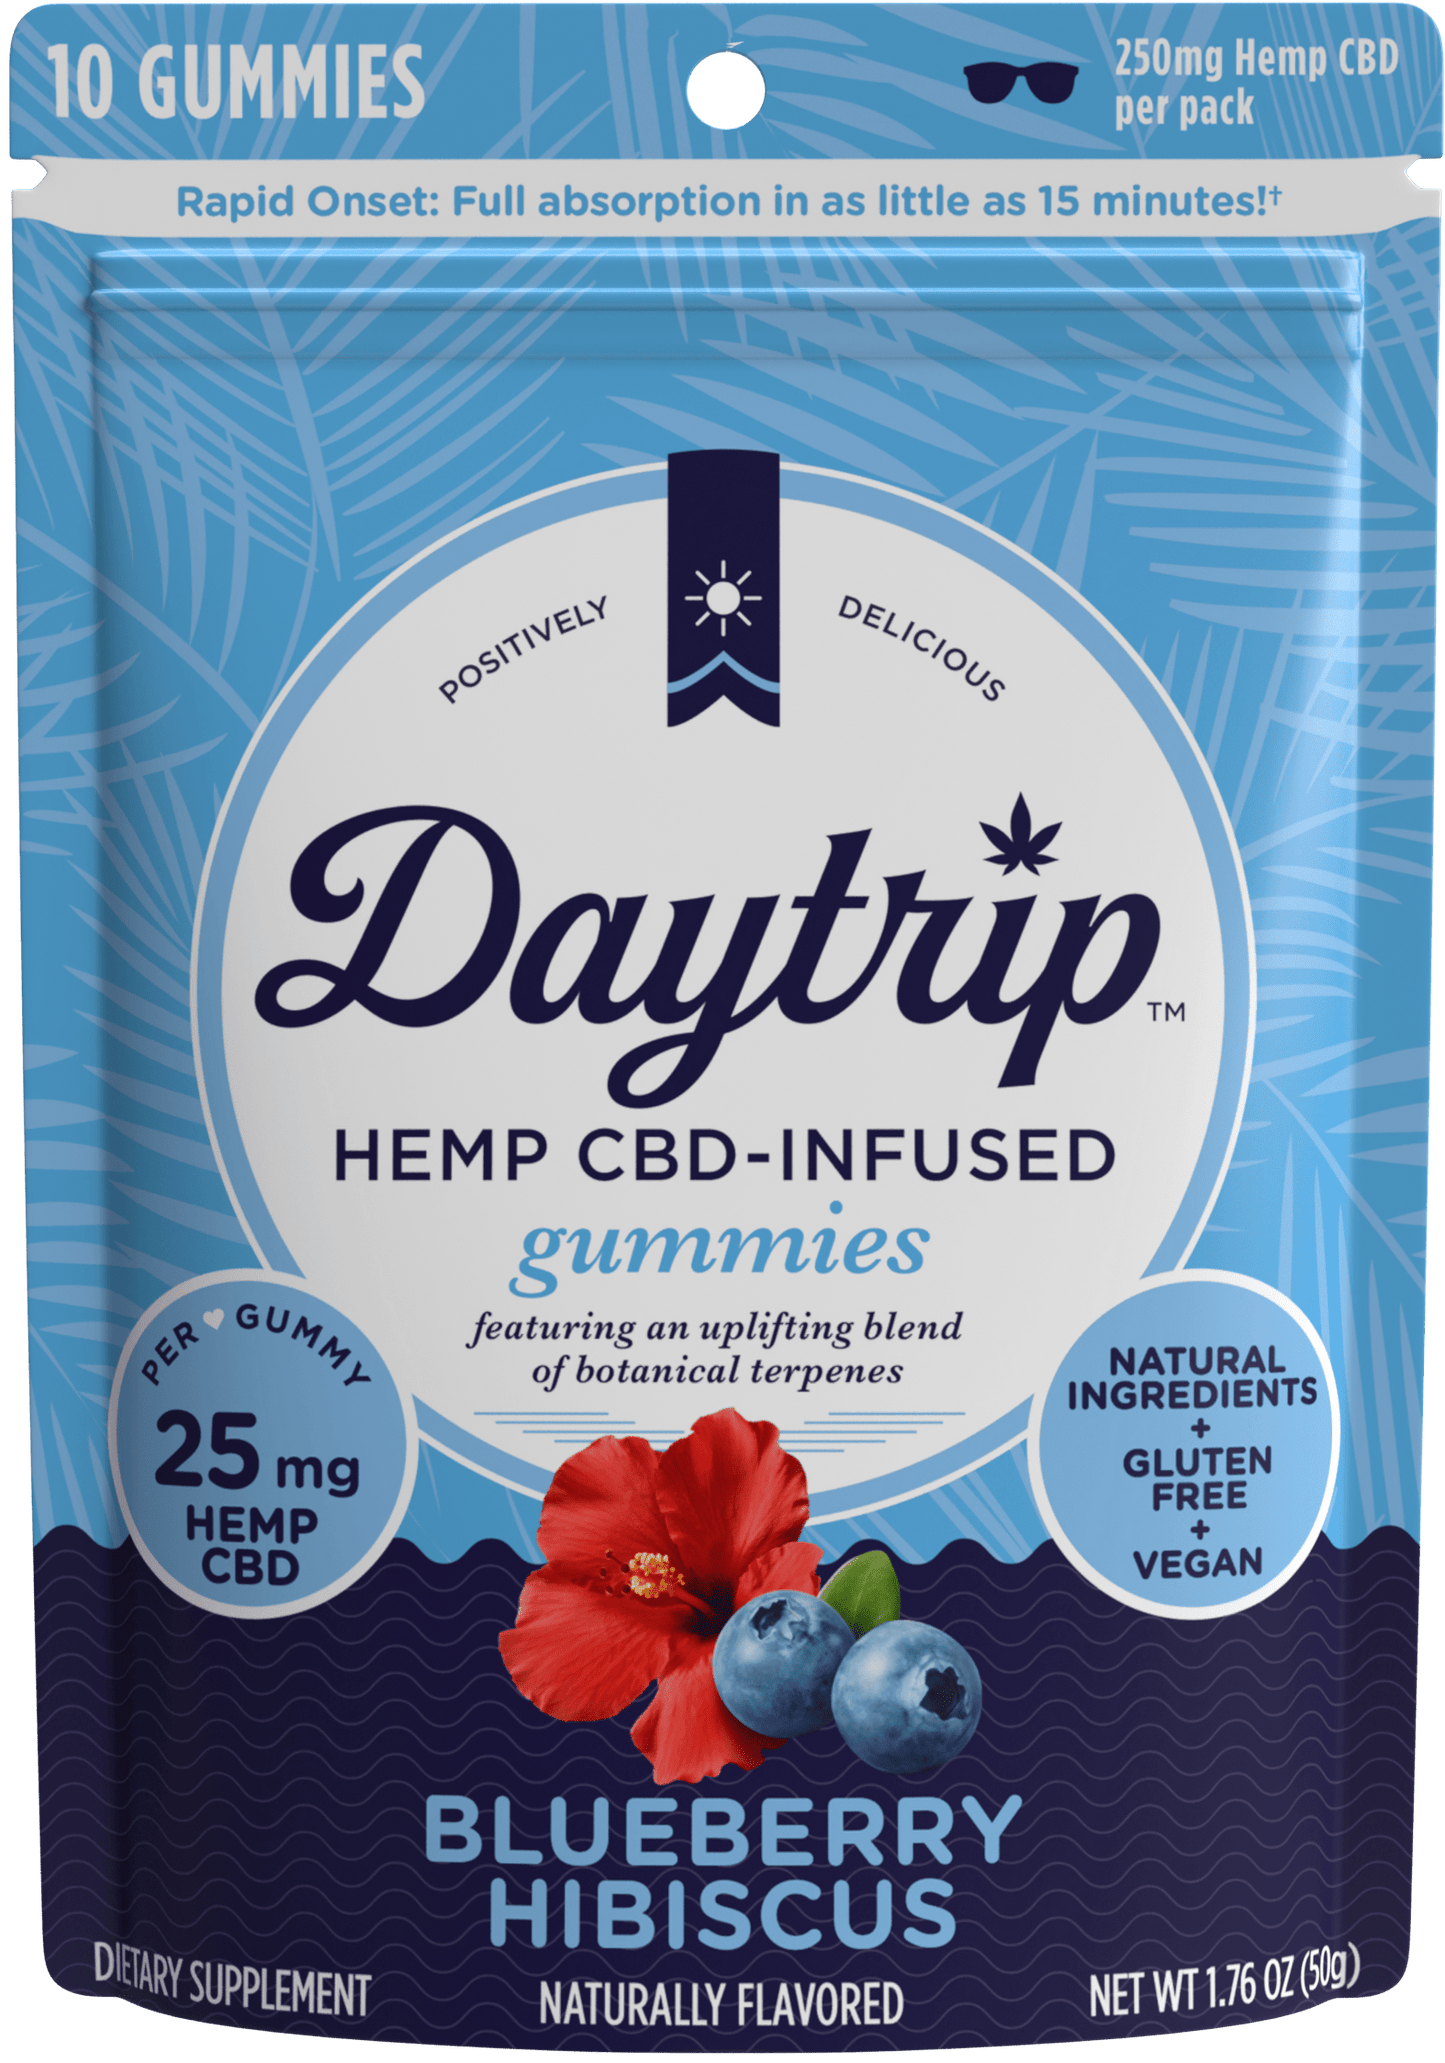 Packaging front render of Daytrip blueberry hibiscus CBD-infused gummies.